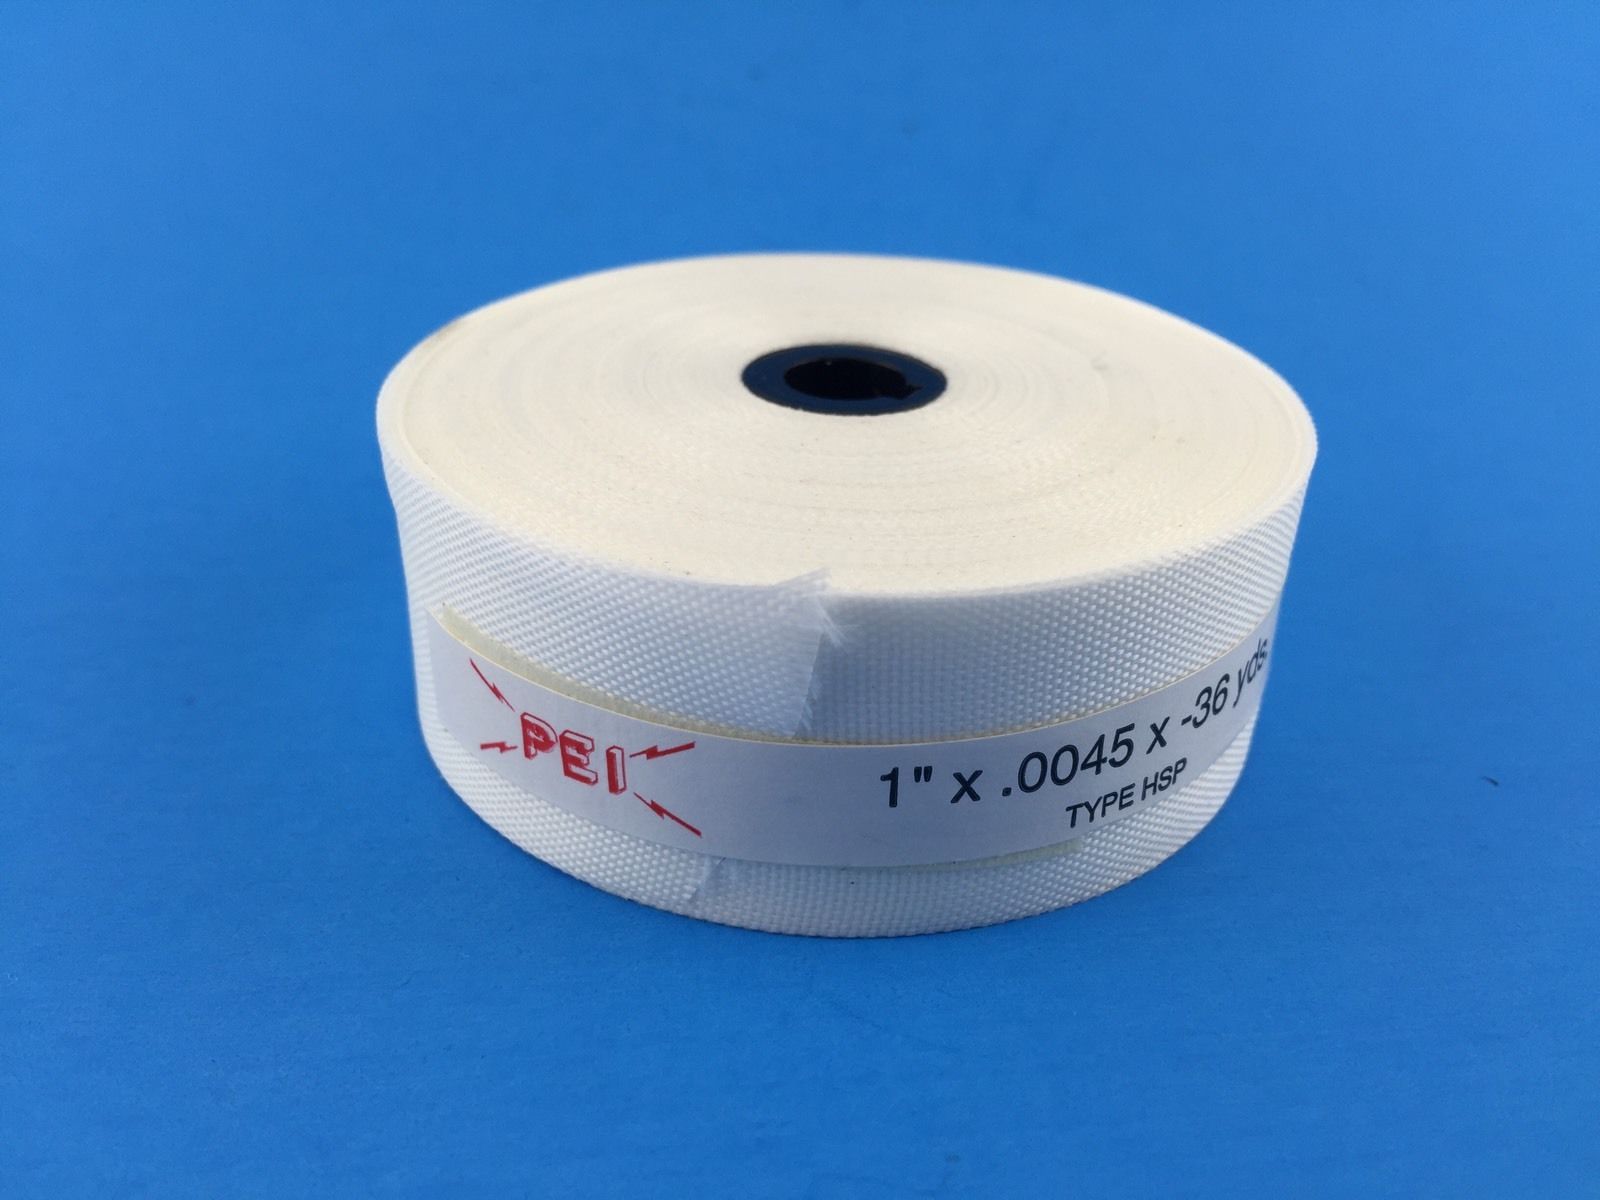 1" HSP 100 .005" thick Heat Shrinkable Polyester Tape 155°C, white, 1" wide x  72 YD roll